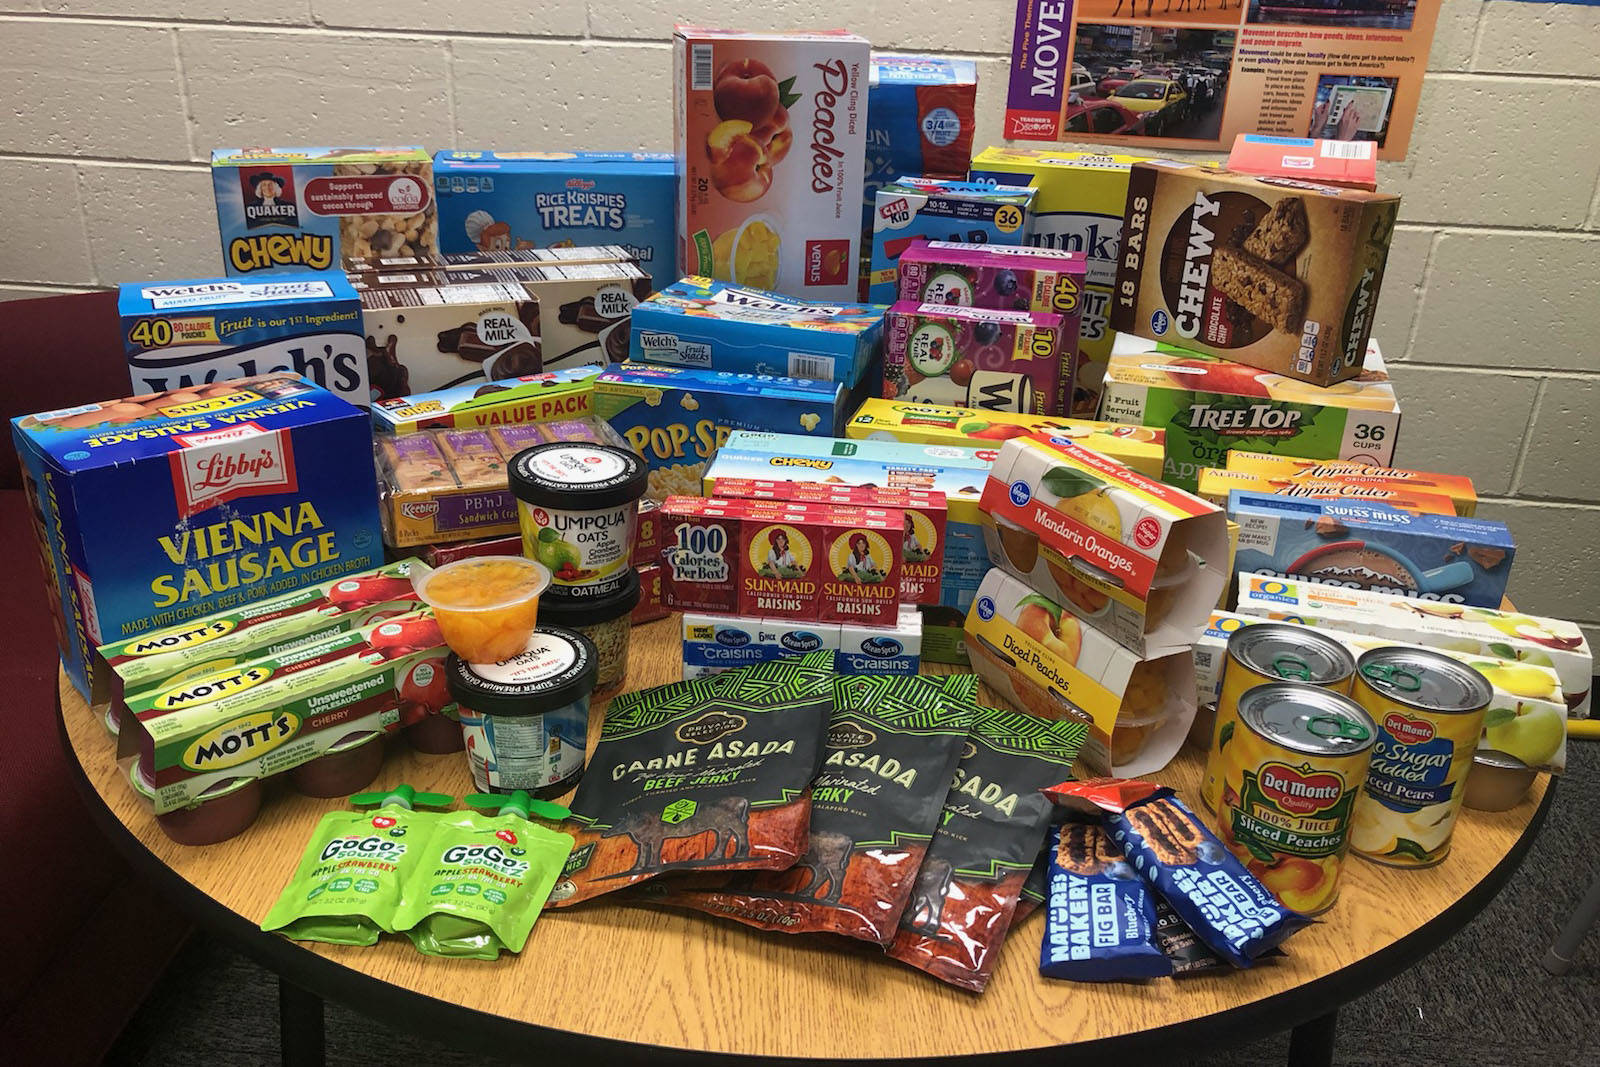 The food collected during Skyview Middle School’s snack drive can be seen here at Skyview Middle School in Soldotna, Alaska on Sept. 20, 2019. (Photo courtesy Sheilah-Margaret Pothast)